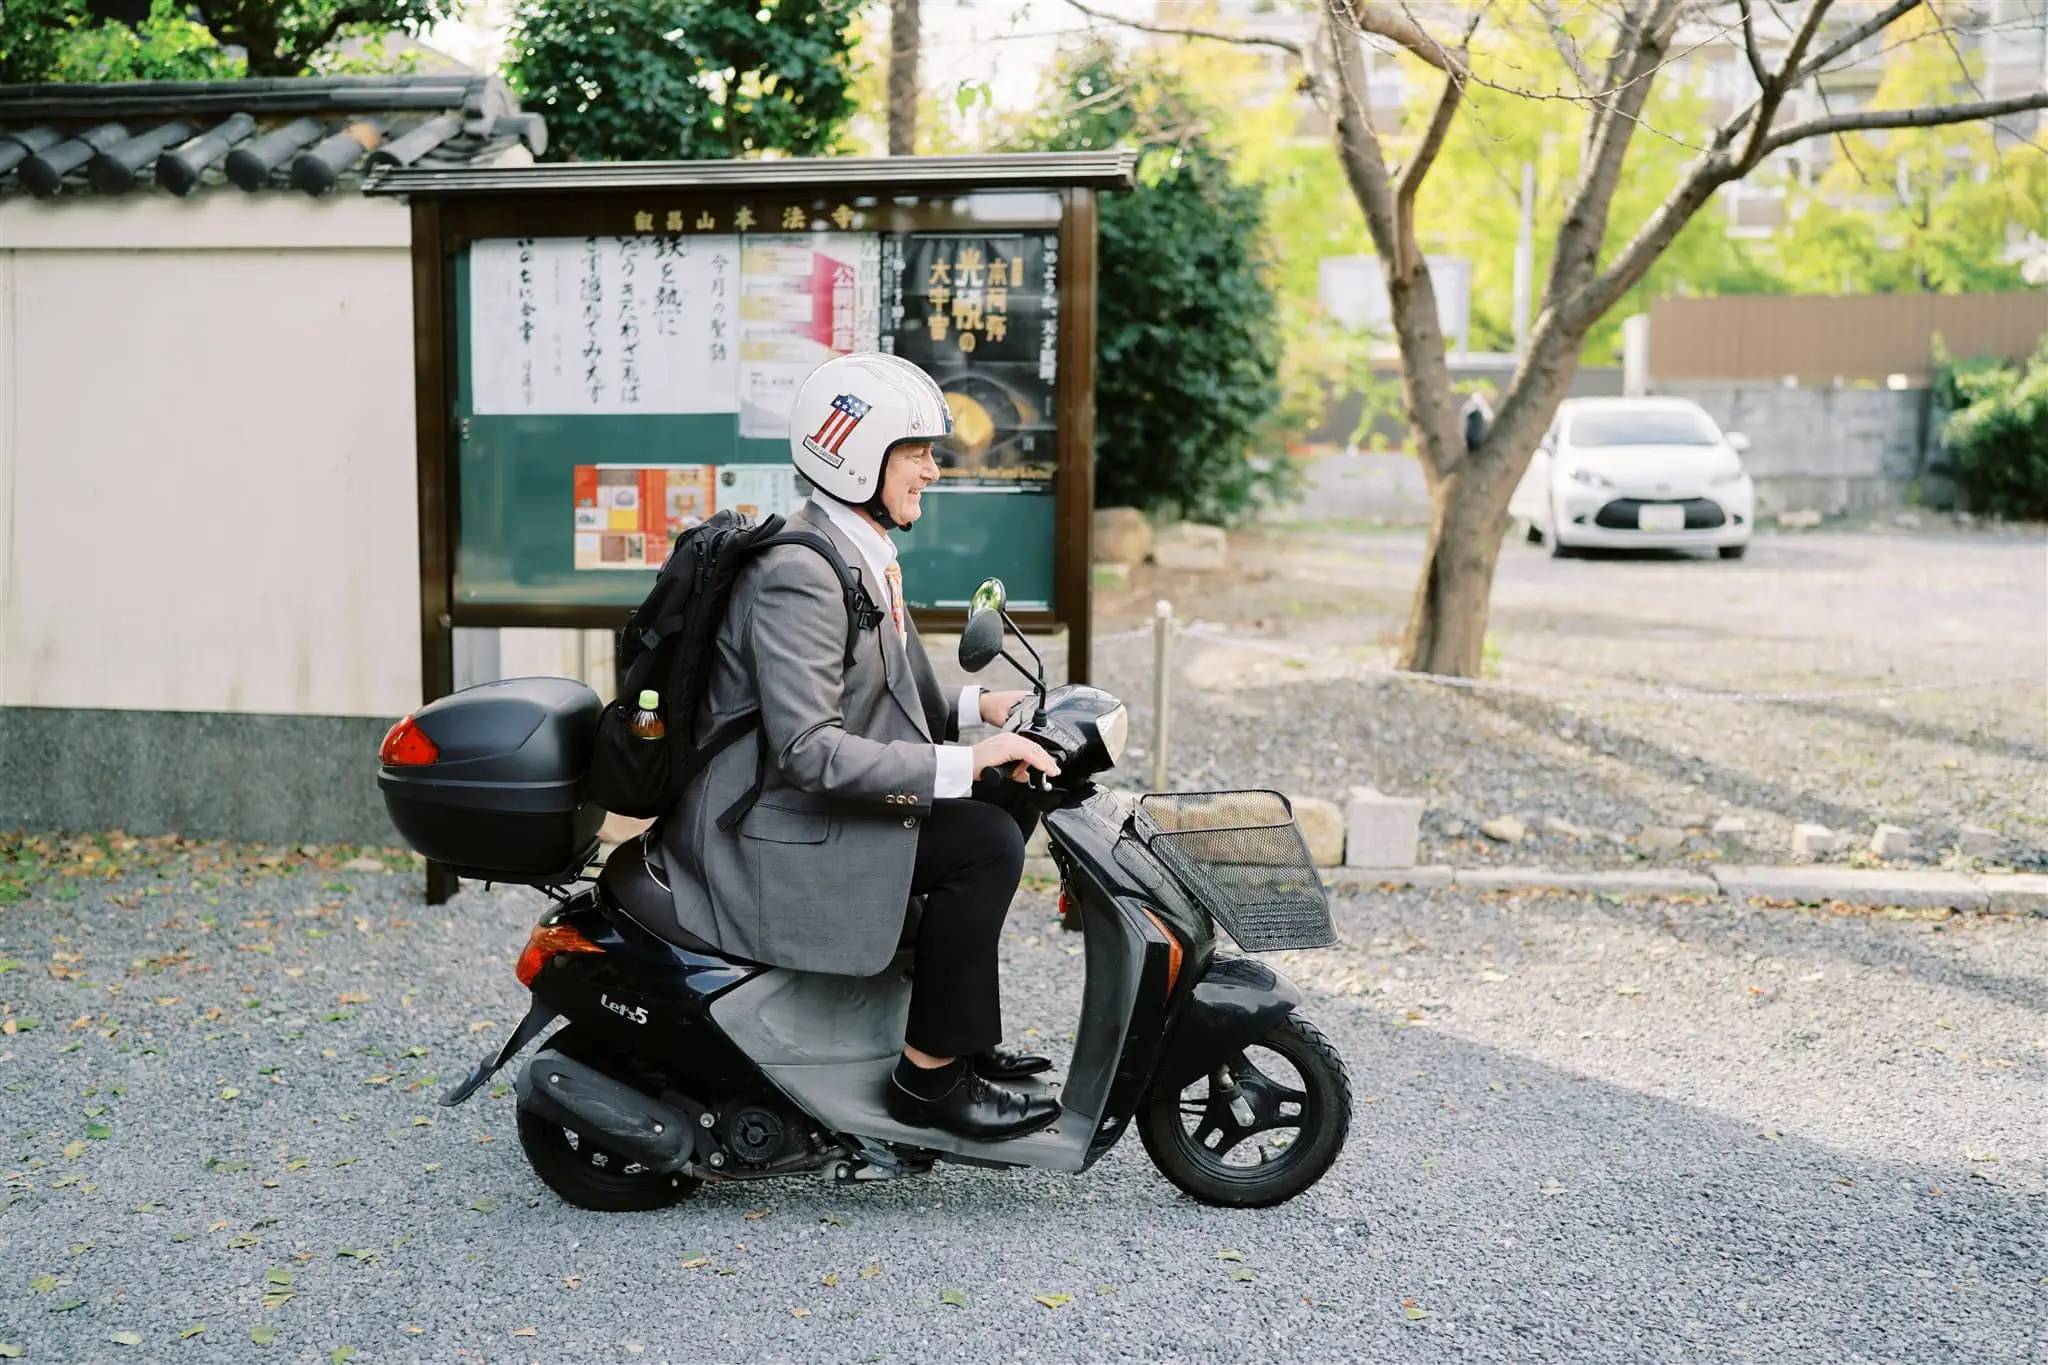 Kyoto Tokyo Japan Elopement Wedding Photographer, Planner & Videographer | A person on a scooter exploring the streets of Japan.